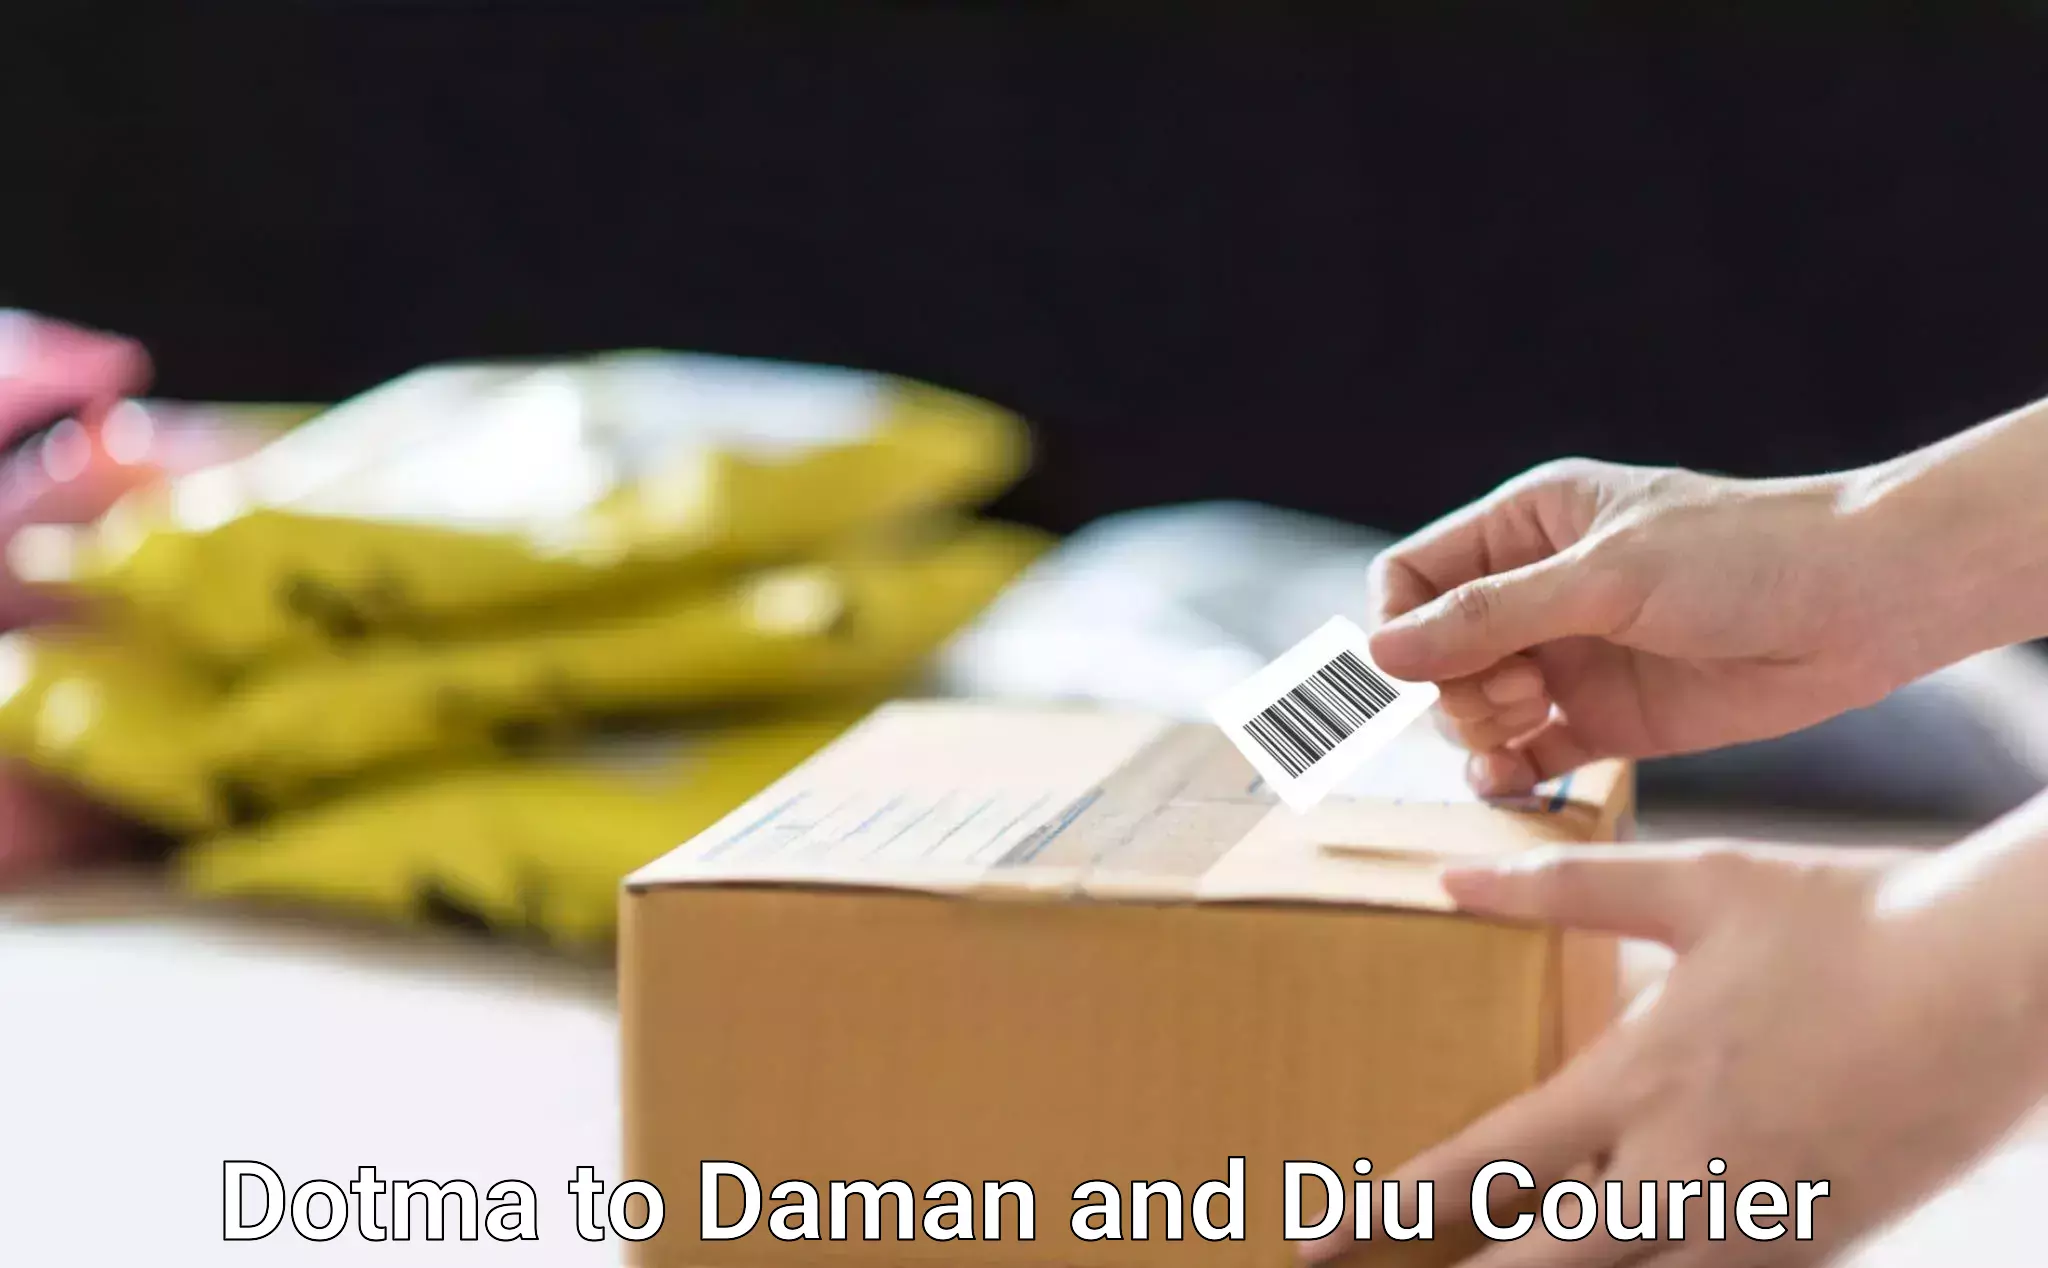 Expedited parcel delivery in Dotma to Diu